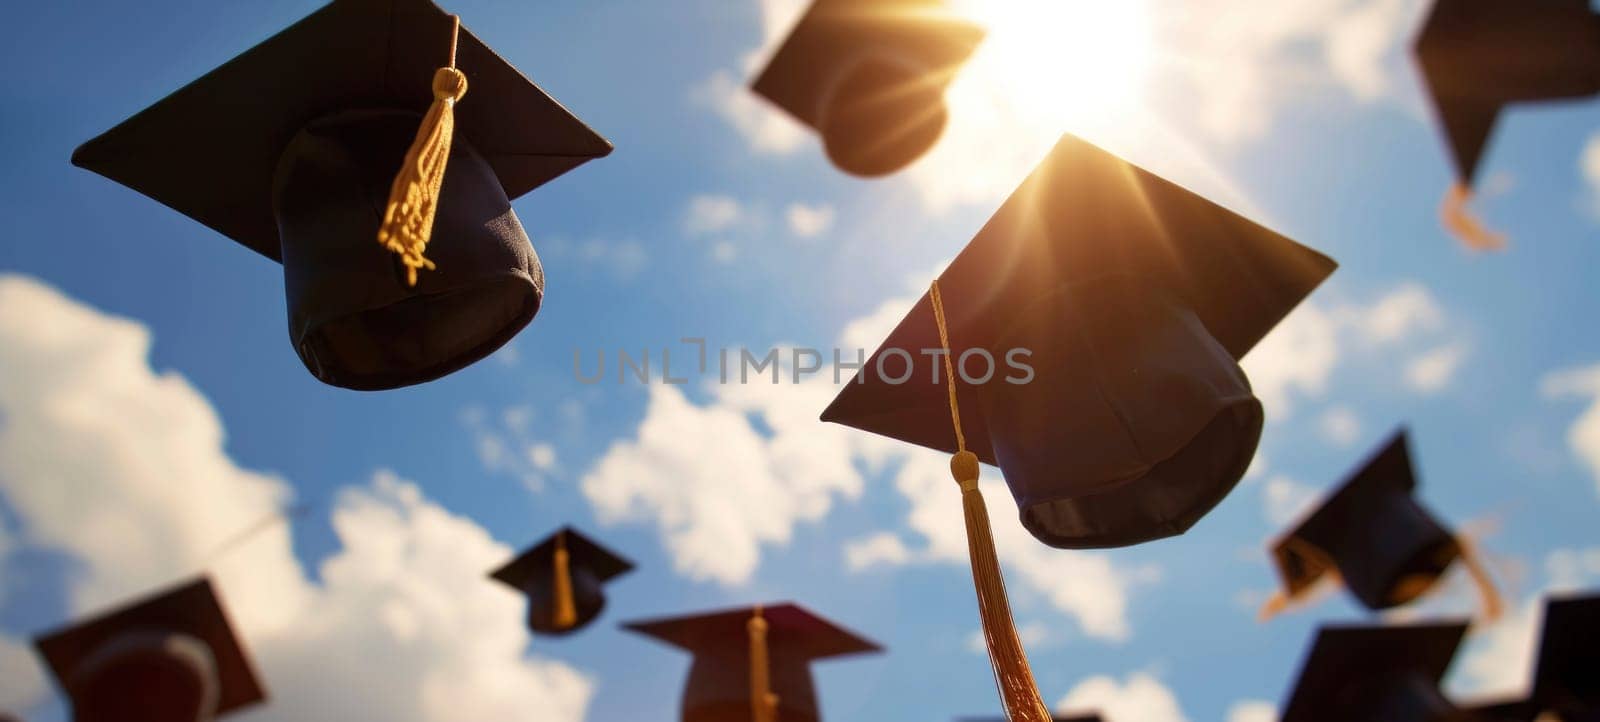 Silhouetted graduation caps thrown aloft against a sunny blue sky with sun rays and clouds